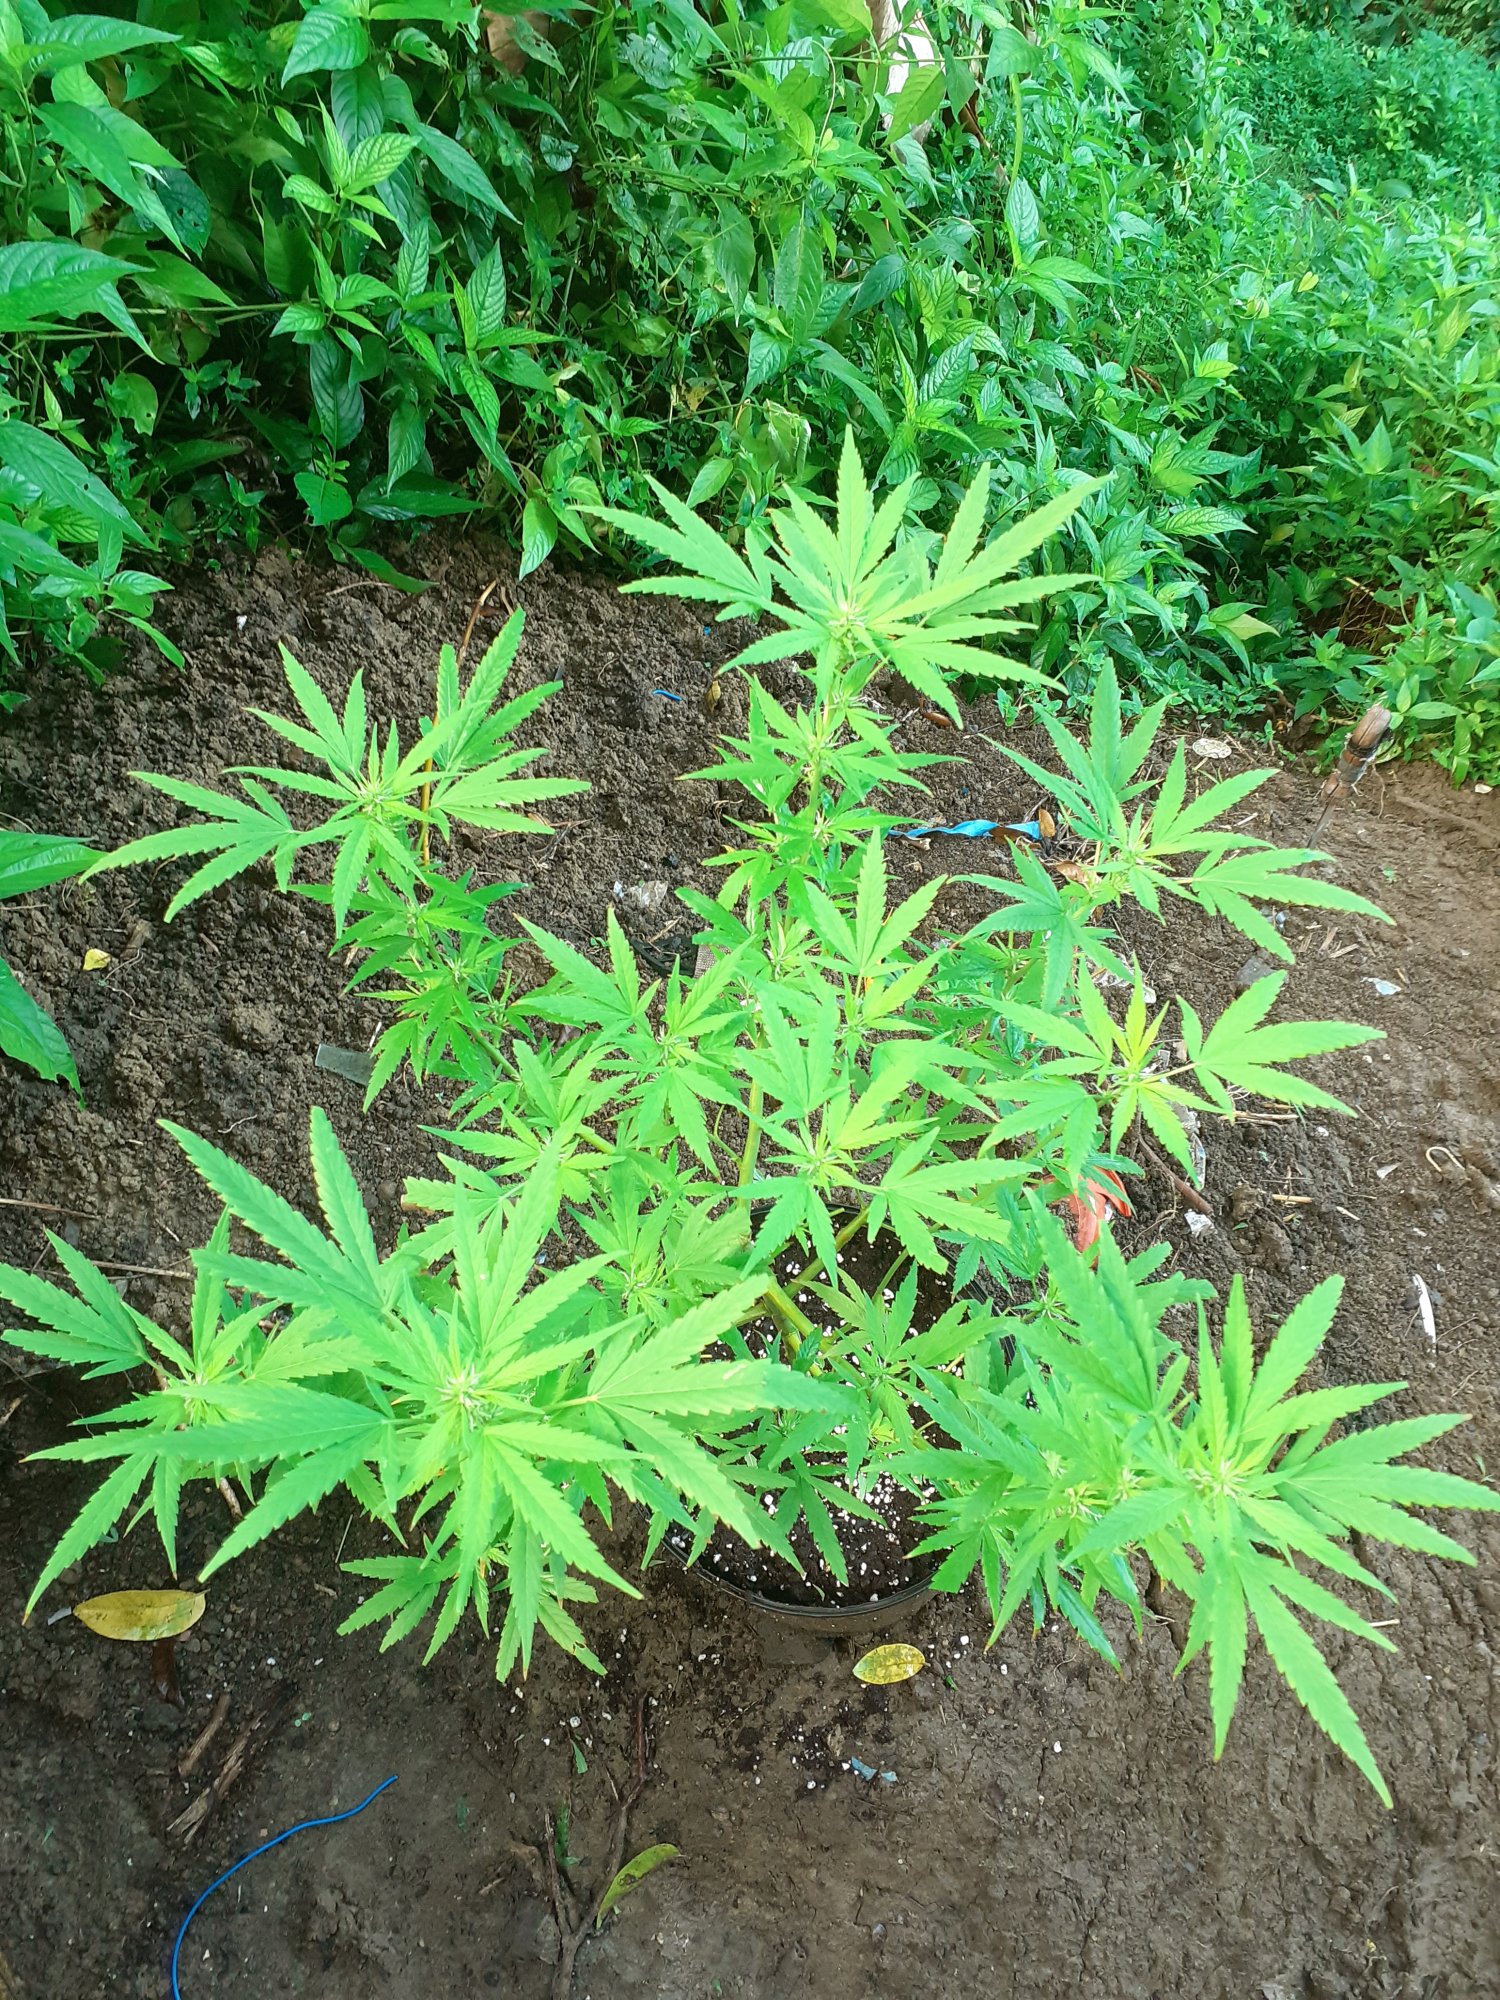 This is my first time growing marijuana